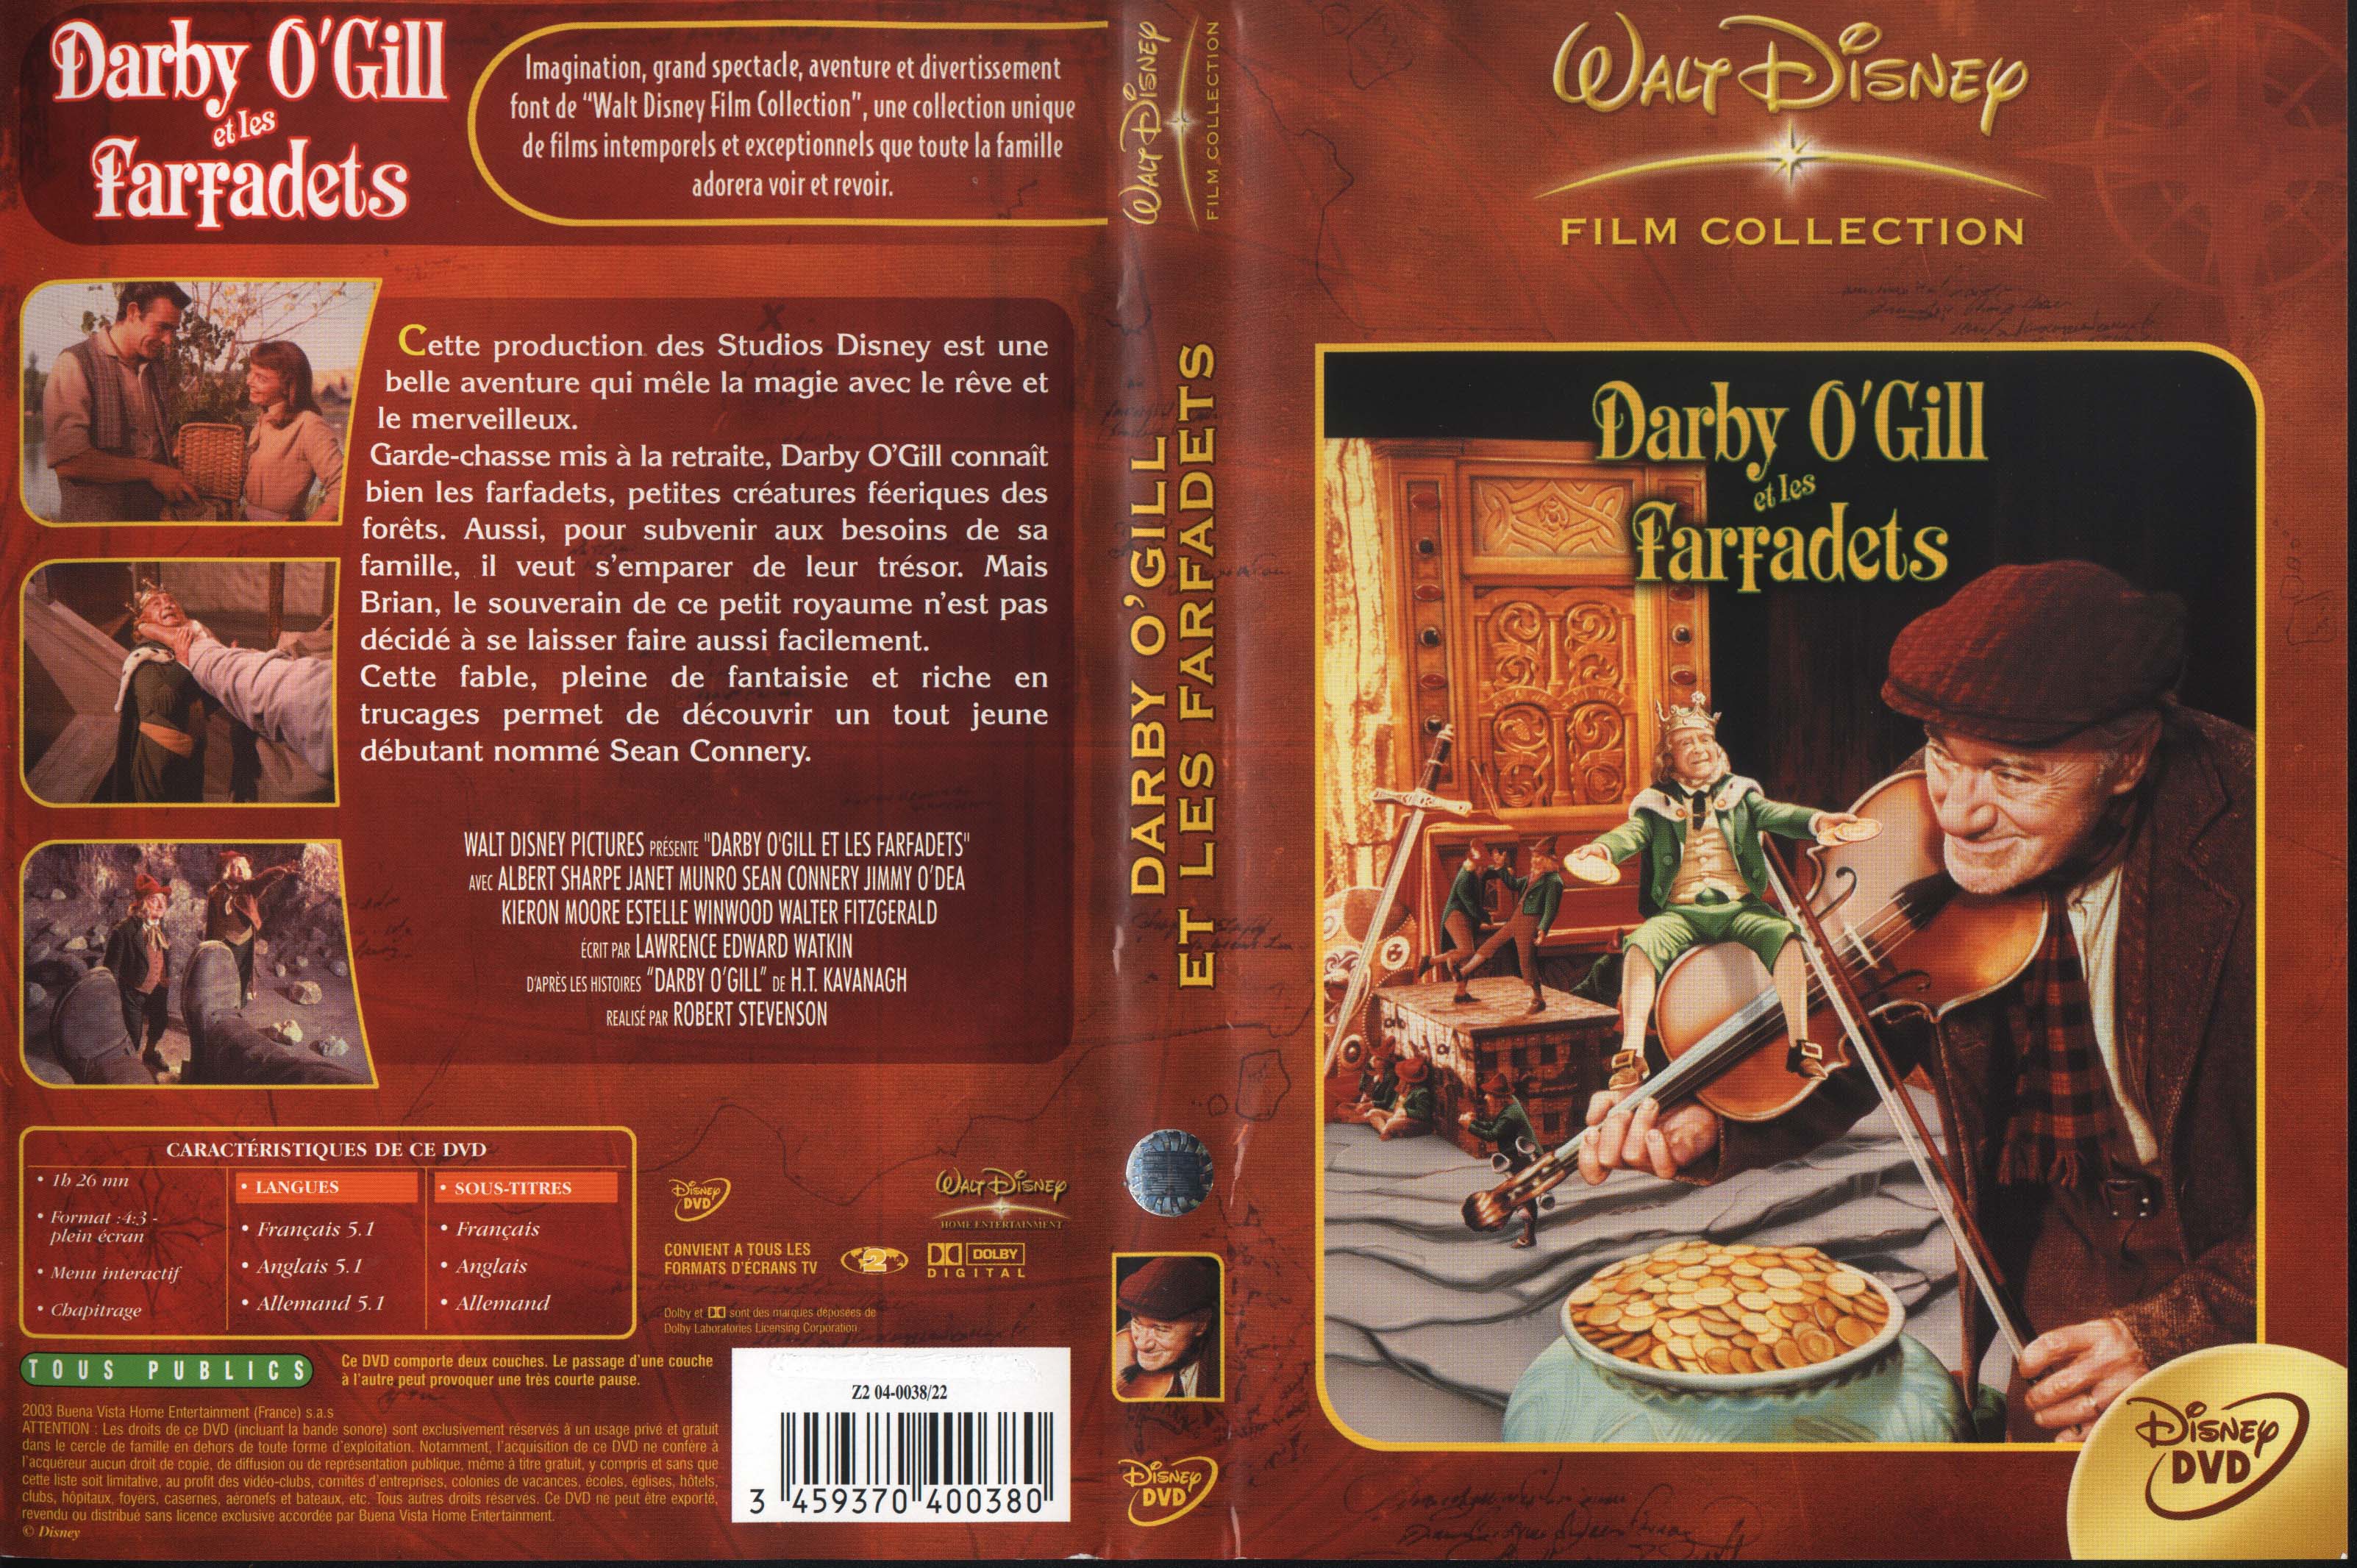 Jaquette DVD Darby O